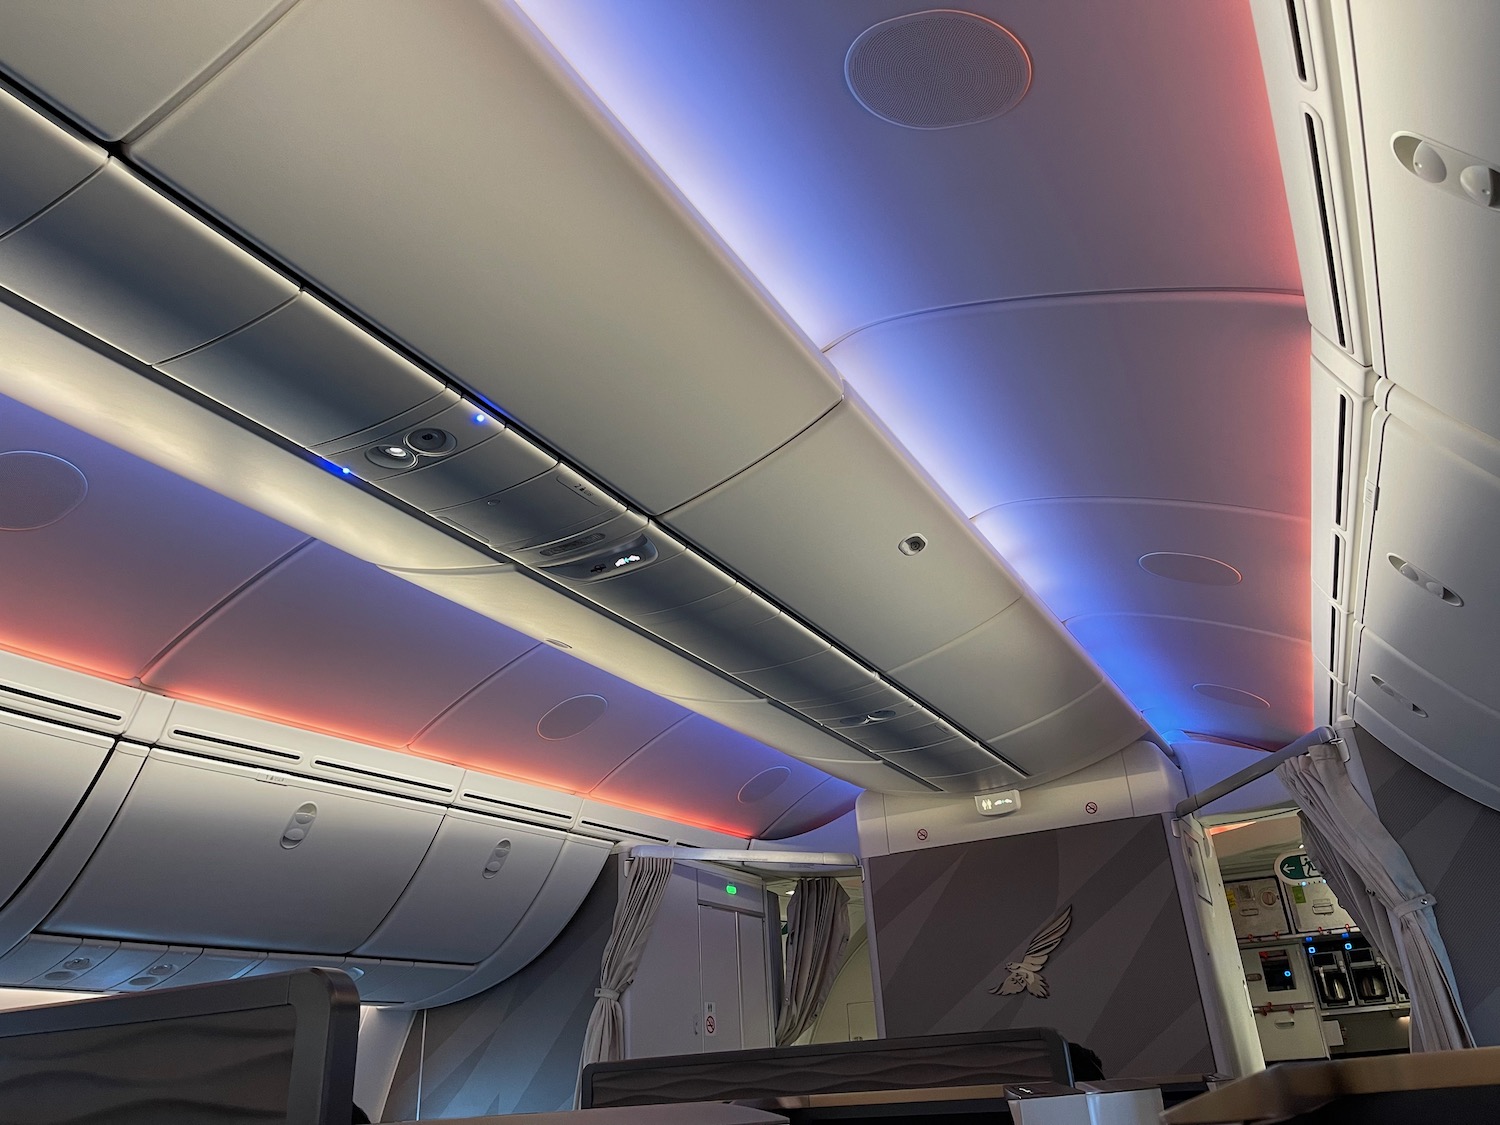 a ceiling and lights in an airplane